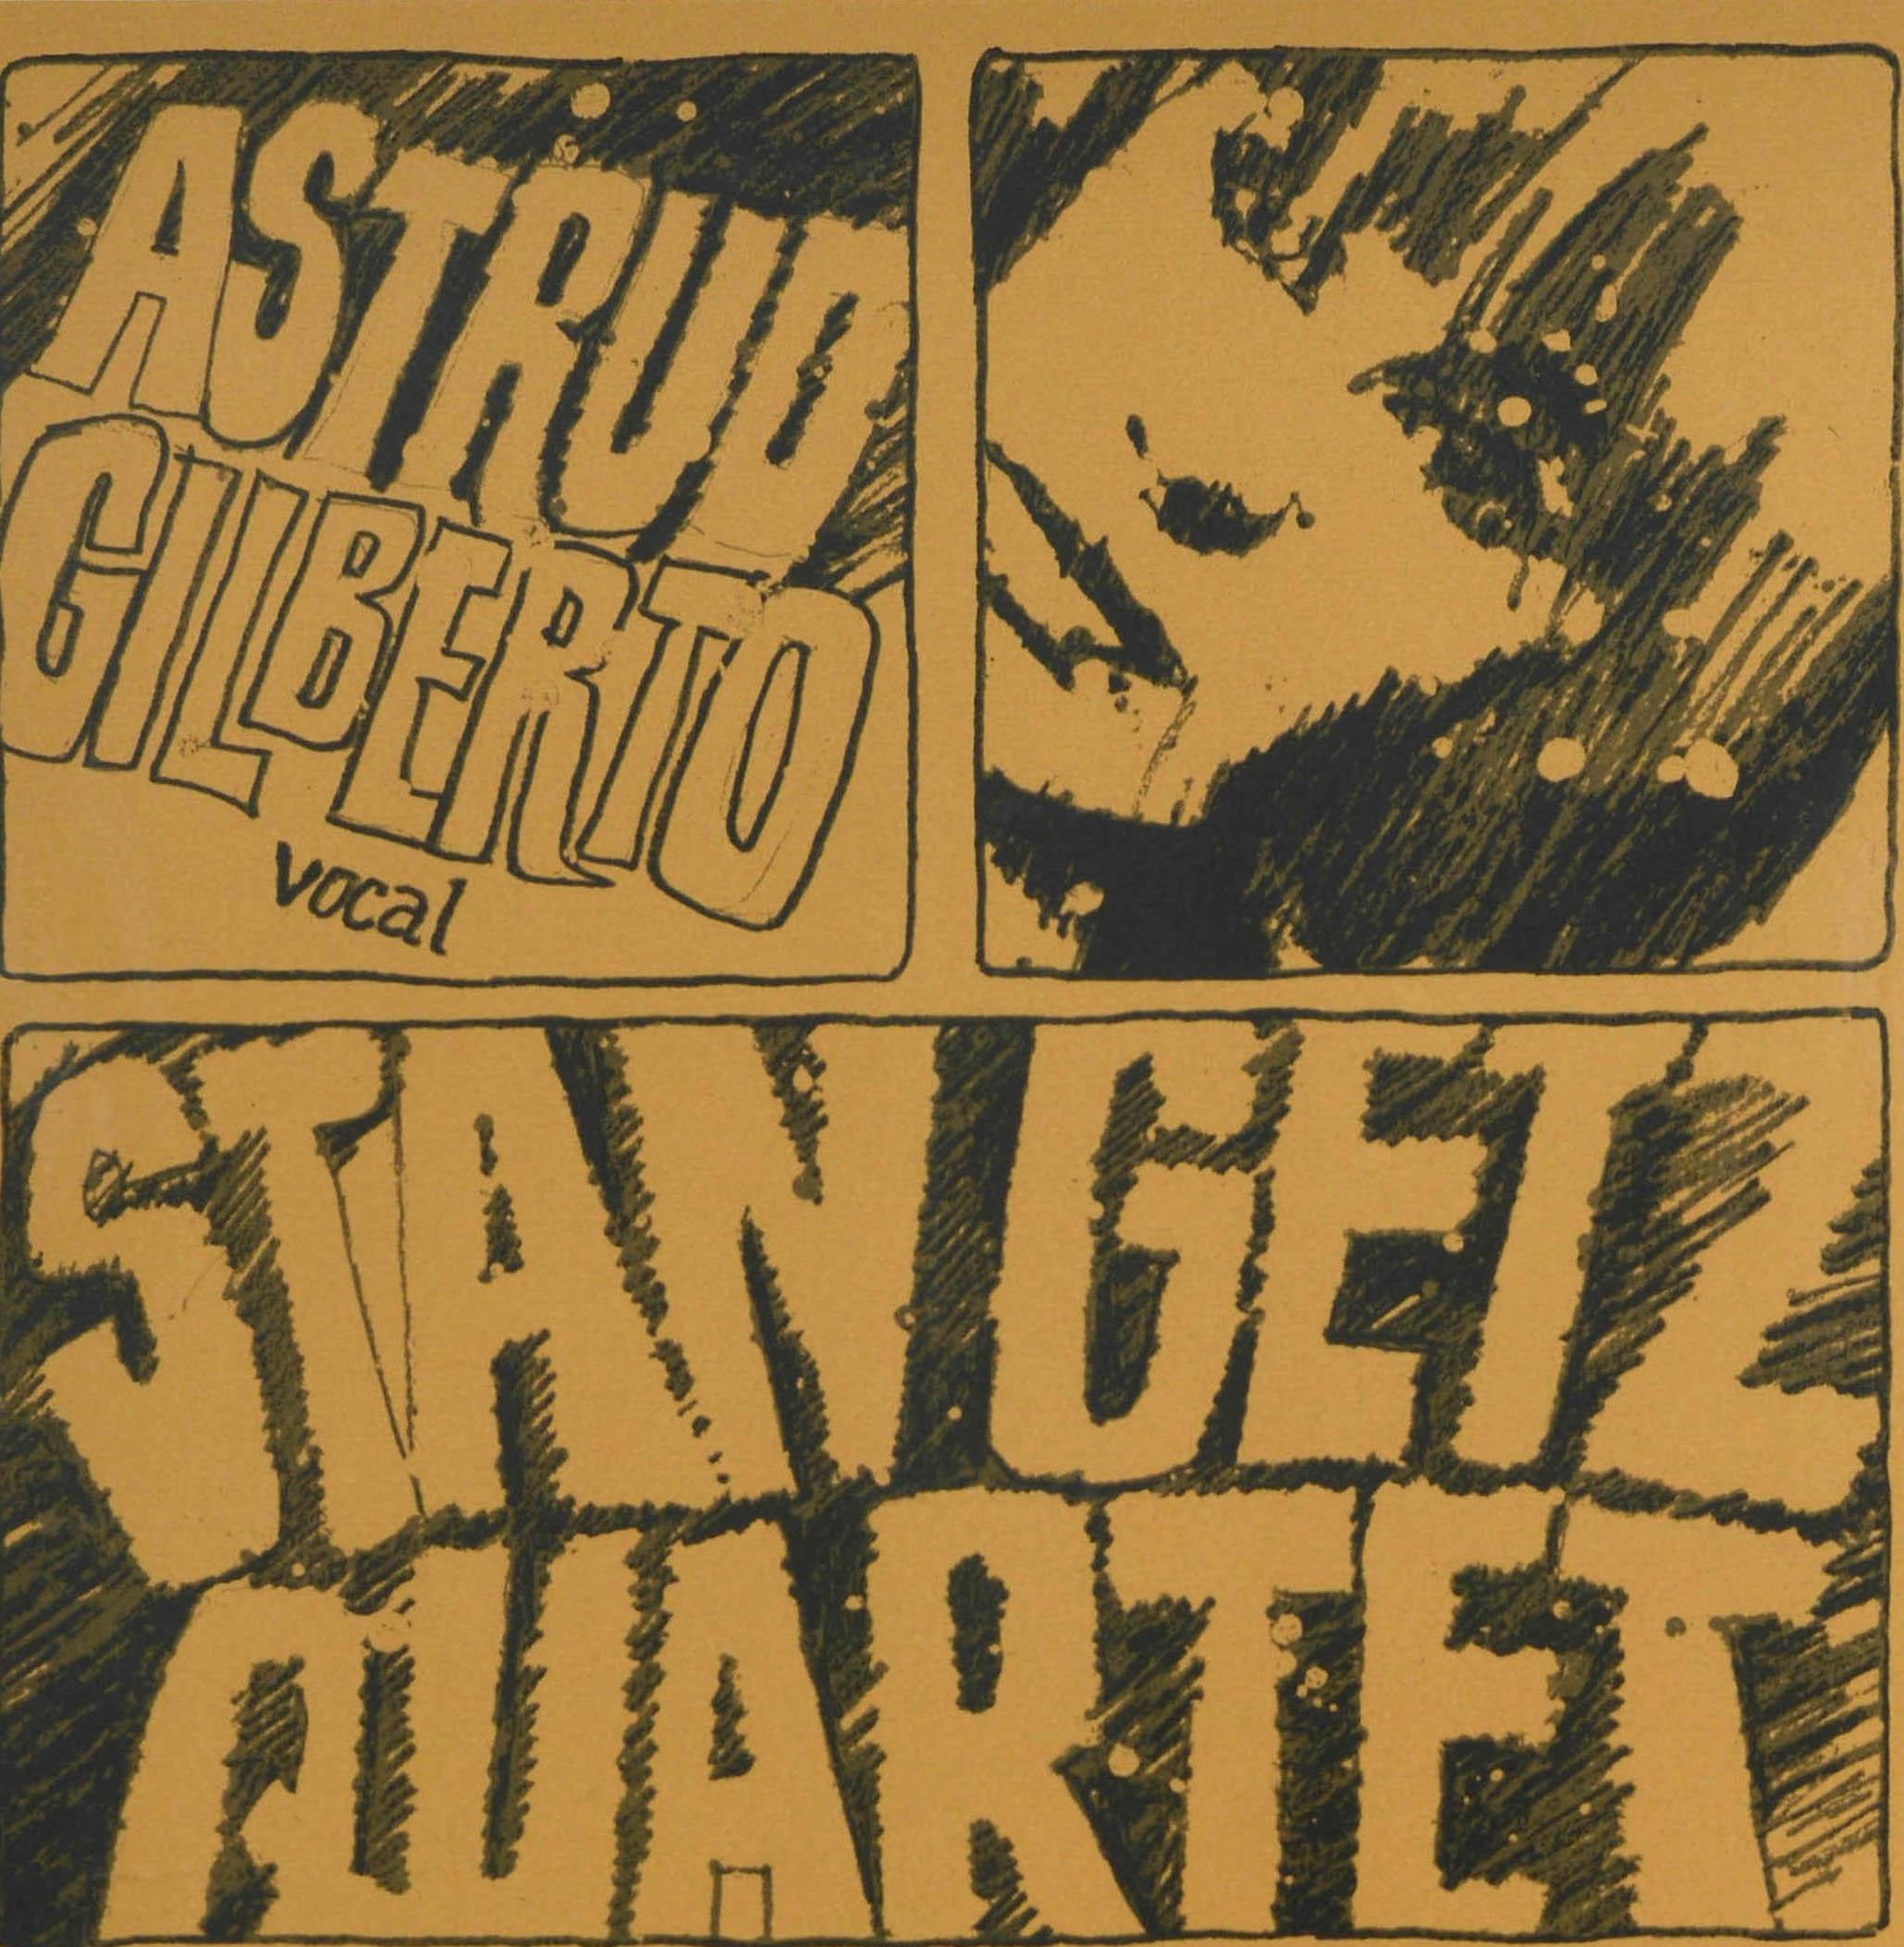 Original vintage music advertising poster for the Stan Getz Quartet show on 5 November 1966 featuring a comic strip design with an illustration of the Brazilian samba and bossa nova singer Astrud Gilberto (b 1940) vocal and the American jazz band